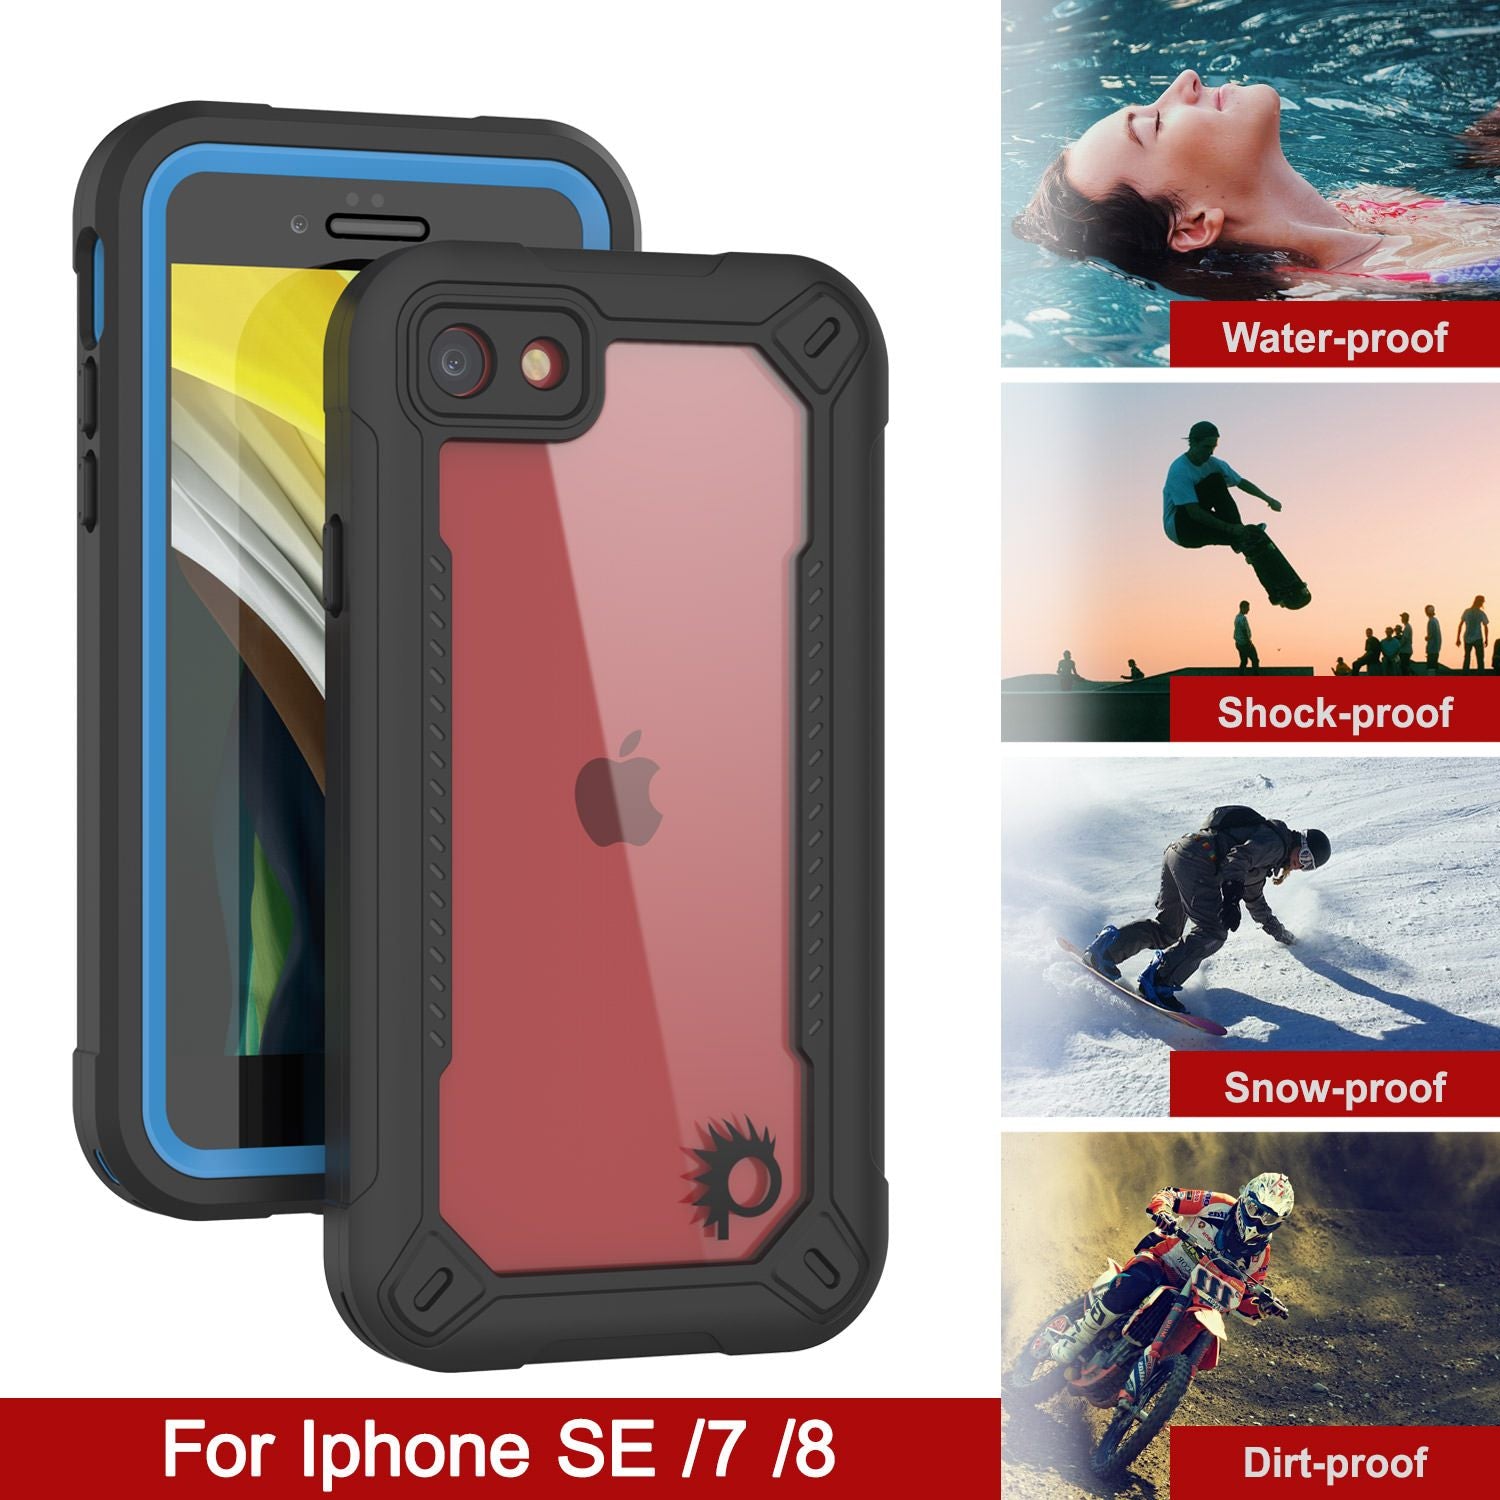 iPhone 8 Waterproof IP68 Case, Punkcase [Blue]  [Maximus Series] [Slim Fit] [IP68 Certified] [Shockresistant] Clear Armor Cover with Screen Protector | Ultimate Protection